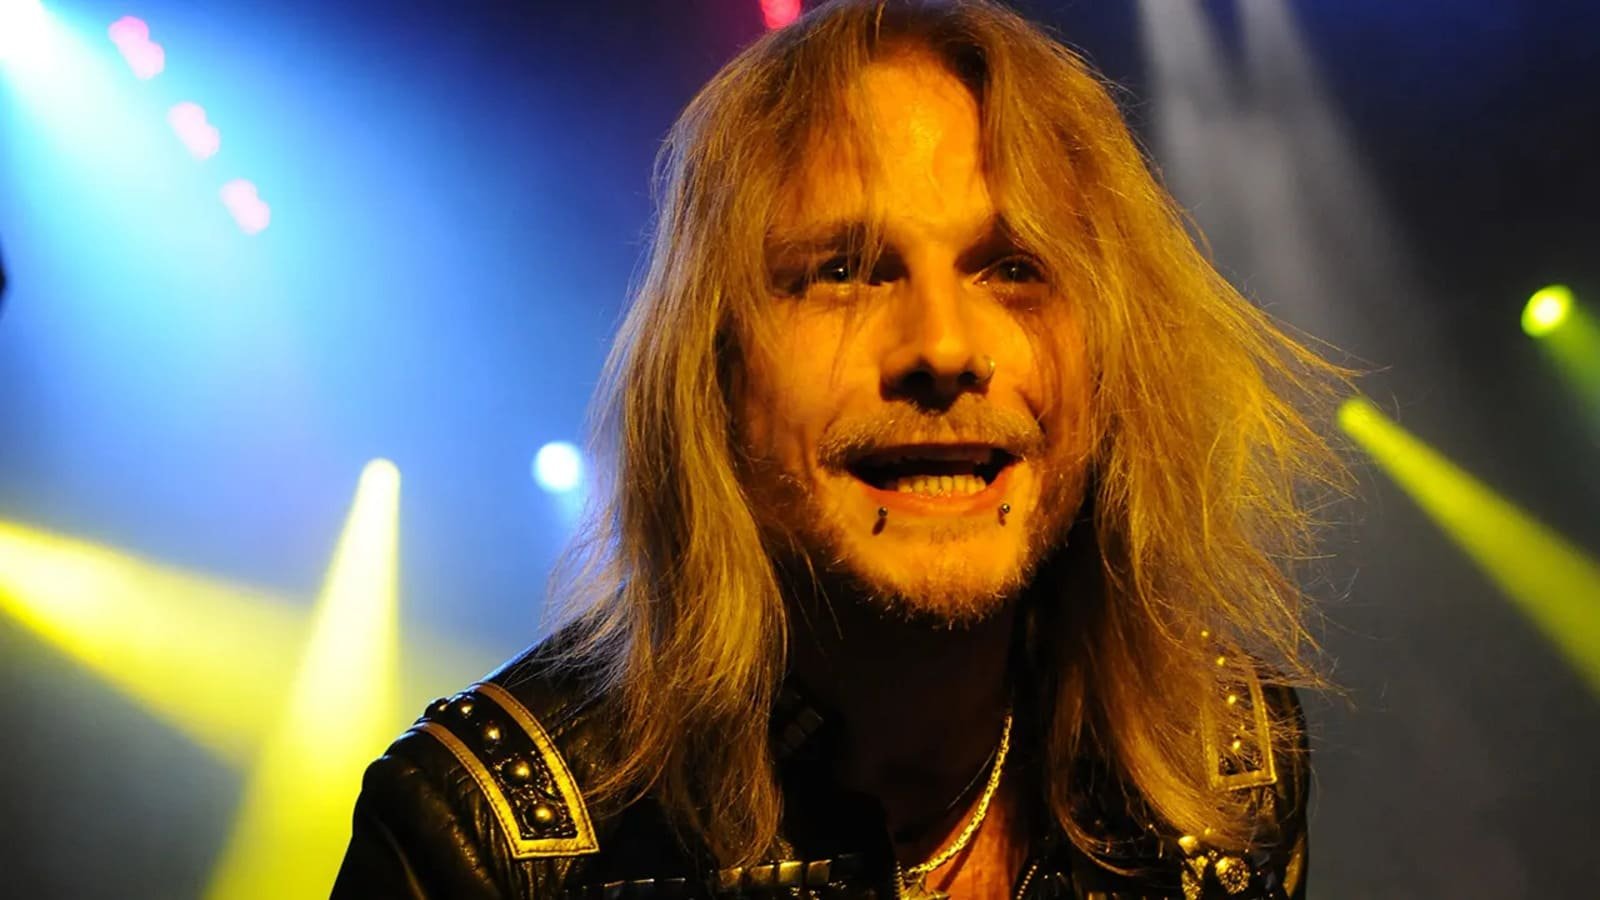 The Top 10 Albums That Richie Faulkner Listed As His Favorites